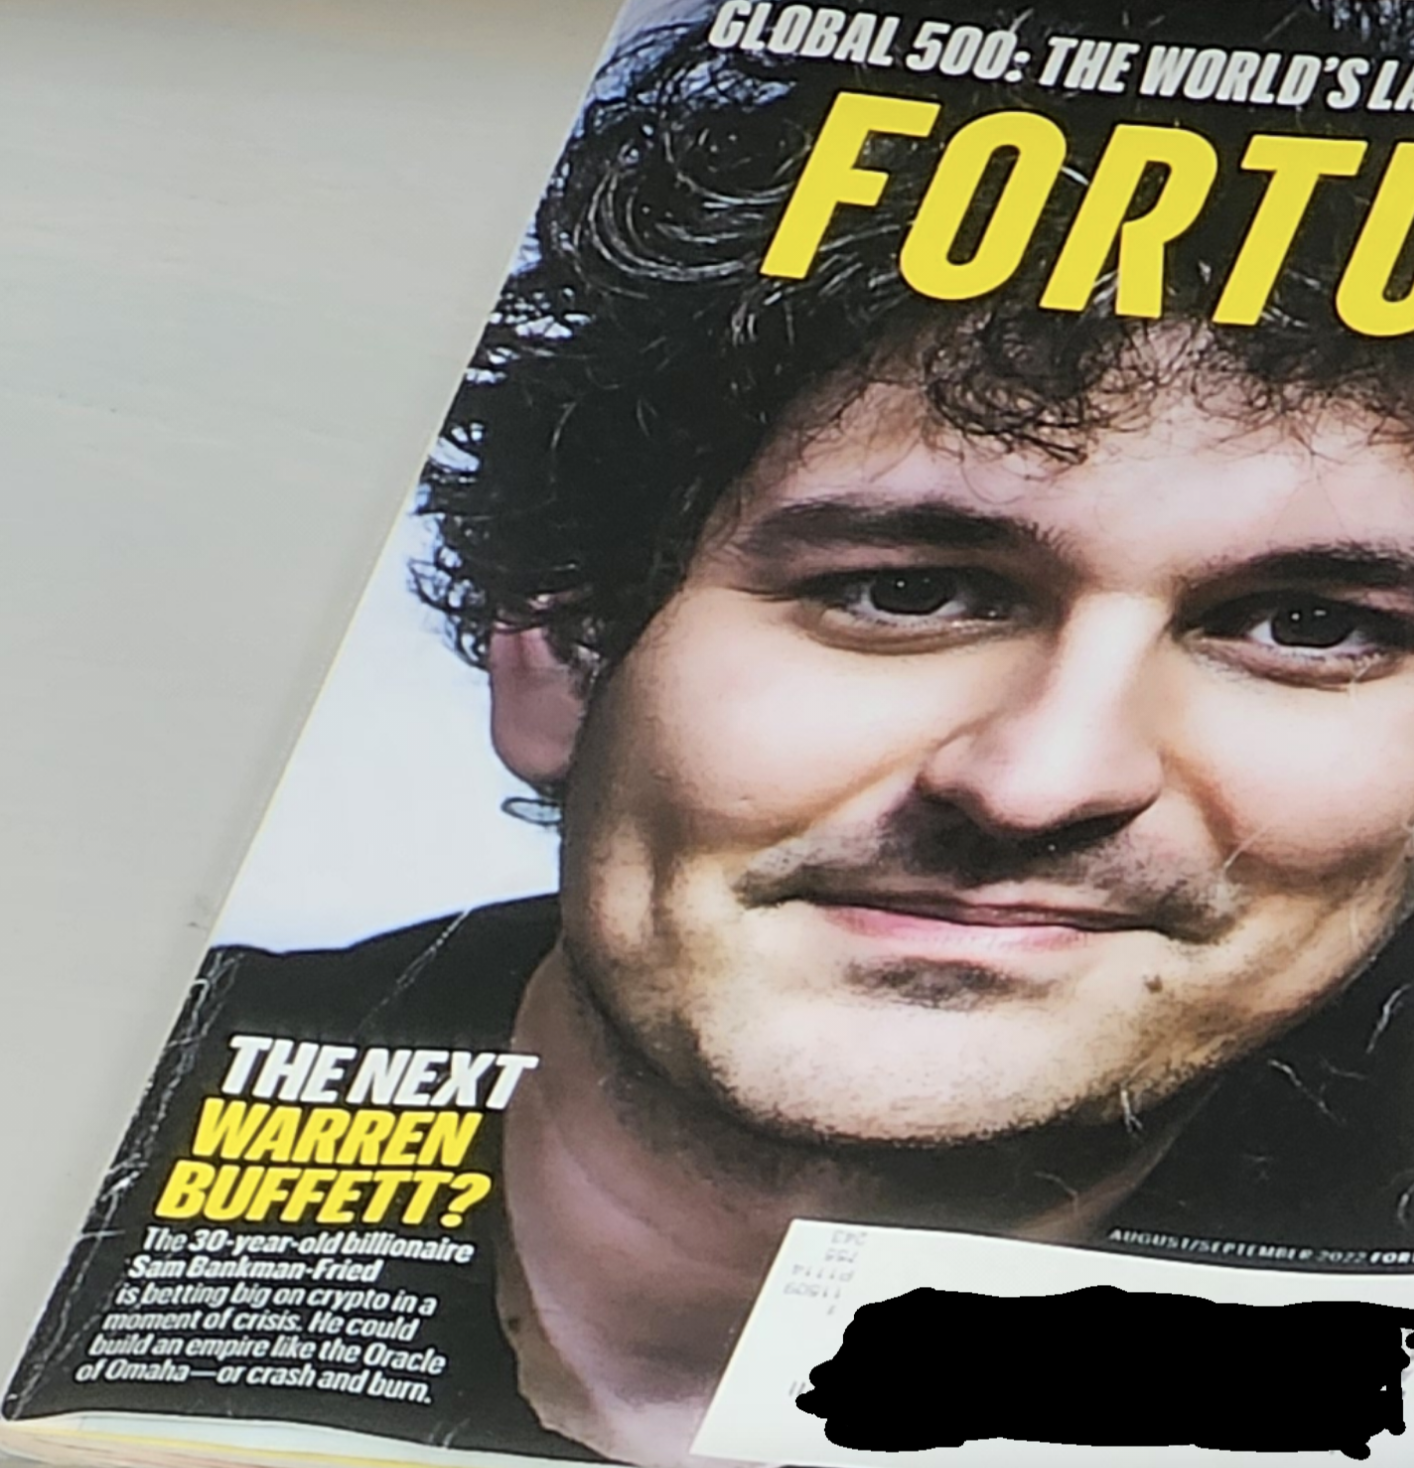 magazine - The Next Warren Buffett? The 30yearold billionaire Sam BankmanFried is betting big on crypto in a moment of crisis. He could build an empire the Oracle of Omahaor crash and burn Global 500 The World'S La Fort